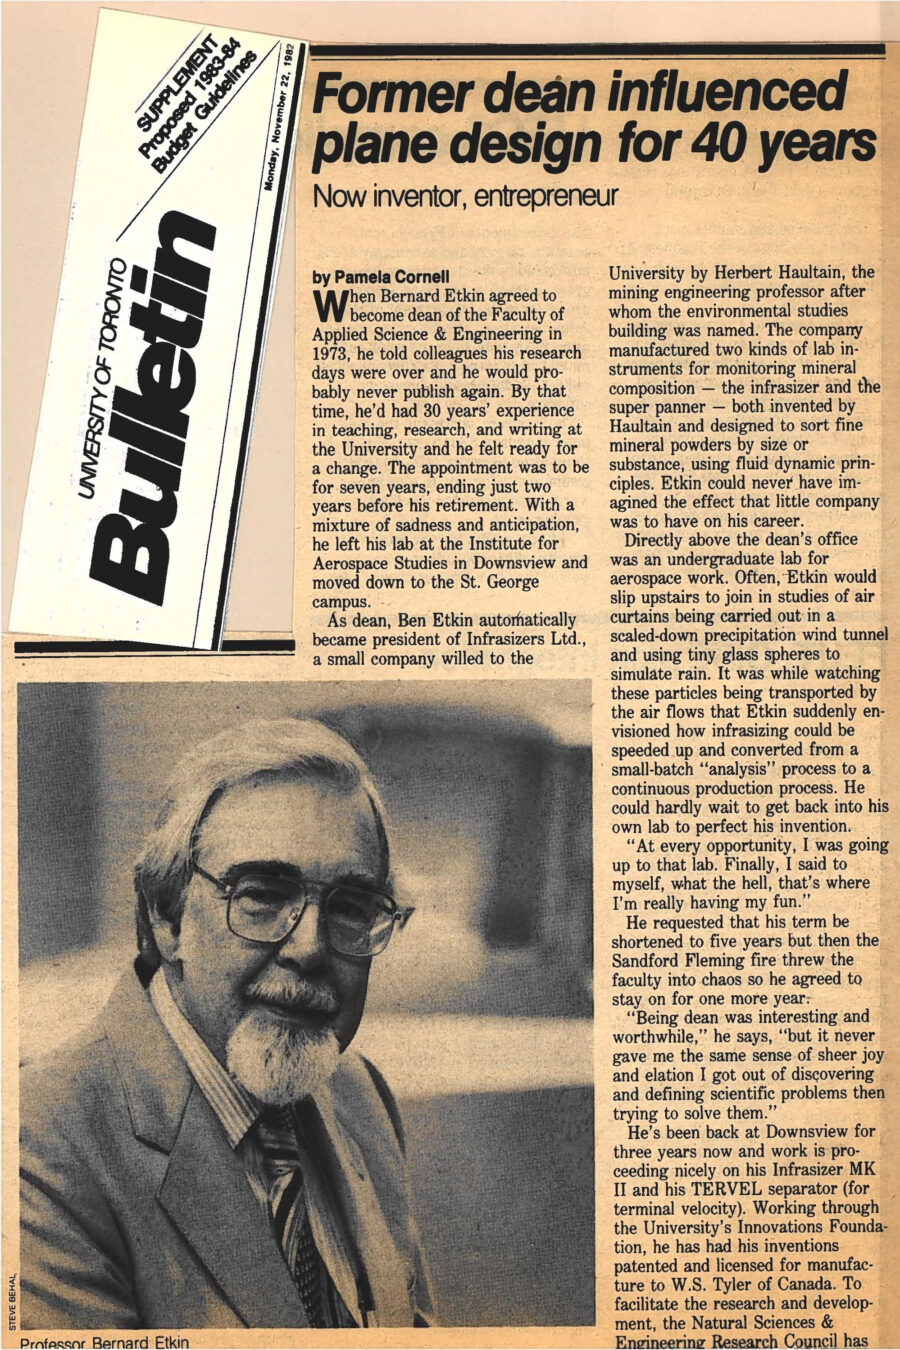 Newspaper clipping from University of Toronto Bulletin, November 22, 1982
Headline: Former dean influenced plane design for 40 years
Byline: Pamela Cornell
Photo: A portrait of Professor Bernard Etkin, older, distinguished, wearing a light suit and glasses, with white hair and a white mustache and goatee.
Caption: Professor Bernard Etkin
Professor Bernard Etkin has a long history of innovation with the University of Toronto Institute of Aerospace Studies. He became Dean in 1973, with 30 years of experience teaching, researching and writing. He thought his research would be over with his administrative post, but soon discovered differently. As dean, Etkin became president of Infrasizers Limited, a small company manufacturing two kinds of lab instruments for monitoring mineral composition – the infrasizer and the super panner – both designed to sort fine mineral powders by size or substance, using fluid dynamic principles. The lab was directly above the Dean’s office, and Etkin often slipped up stairs to join in studies of air curtains being carried out in a scaled-down precipitation wind tunnel using tiny glass spheres to simulate rain. Watching these particles transported by air flows gave Etkin the inspiration to speed up infrasizing to a continuous production process. Eager to pursue his breakthrough, he cut his term short by a year. Back at Downsview for three years now, his work on his Infrasizer MK II and his TERVEL separator (for terminal velocity) have proceeded nicely. Working through the University’s Innovations Foundation, he has had his inventions patented and licensed for manufacture to W.S. Tyler of Canada. The Natural Sciences & Engineering Research Council has provided a $64,000 Project Research Applicable in Industry grant, and indicated that a similar amount could be available for a second year. “This is the most exciting phase of my career,” Etkin says, “trying to perfect a practical technological innovation that will be commercially successful in the marketplace.”
Etkin has always brought this enthusiasm to his work. His 1959 textbook Dynamics of Flight is still in use and has been translated into Chinese, German and Russian. In a field where obsolescence comes quickly, Etkin did not expect his book to have a shelf-life of more than five years. It has now been revised and is in its second edition. “The content seemed to offer what people wanted – maybe because my attention was fixed on the most useful things I had learned while working on the design and analysis of twelve different airplanes during and after the Second World War.”
Since 1940, Etkin has served as a consultant to the Canadian aircraft industry. His contribution to wing theory have influenced the design of the US Air Force supersonic bomber, the B58 Convair. For a time, he detoured into space mechanics, discovering the cause of a major problem with Canada’s first satellite, the Alouette I, which had slowed down to half its RPMs while in orbit. Investigators were stumped, until Etkin identified that sunlight was heating half the satellite while the other half remained cold, causing the satellites pole-like antennae to bend. That solar induced thermal bending combined with something called solar radiation pressure caused the slowing down effect. Etkin discovered the phenomenon, now known as solar induced spin decay, just in time for the Alouette II design to be modified.
Etkin’s research on wind turbulence and flight has informed plane design significantly, adopted by the US Air Force, and it forms the basis of a computer program devised by the Australian research council to calculate response of airplanes to atmospheric turbulence.
Etkin reaches official retirement age next May, but far from slowing down, he finds he no longer has time for the golf and ping pong he used to enjoy.